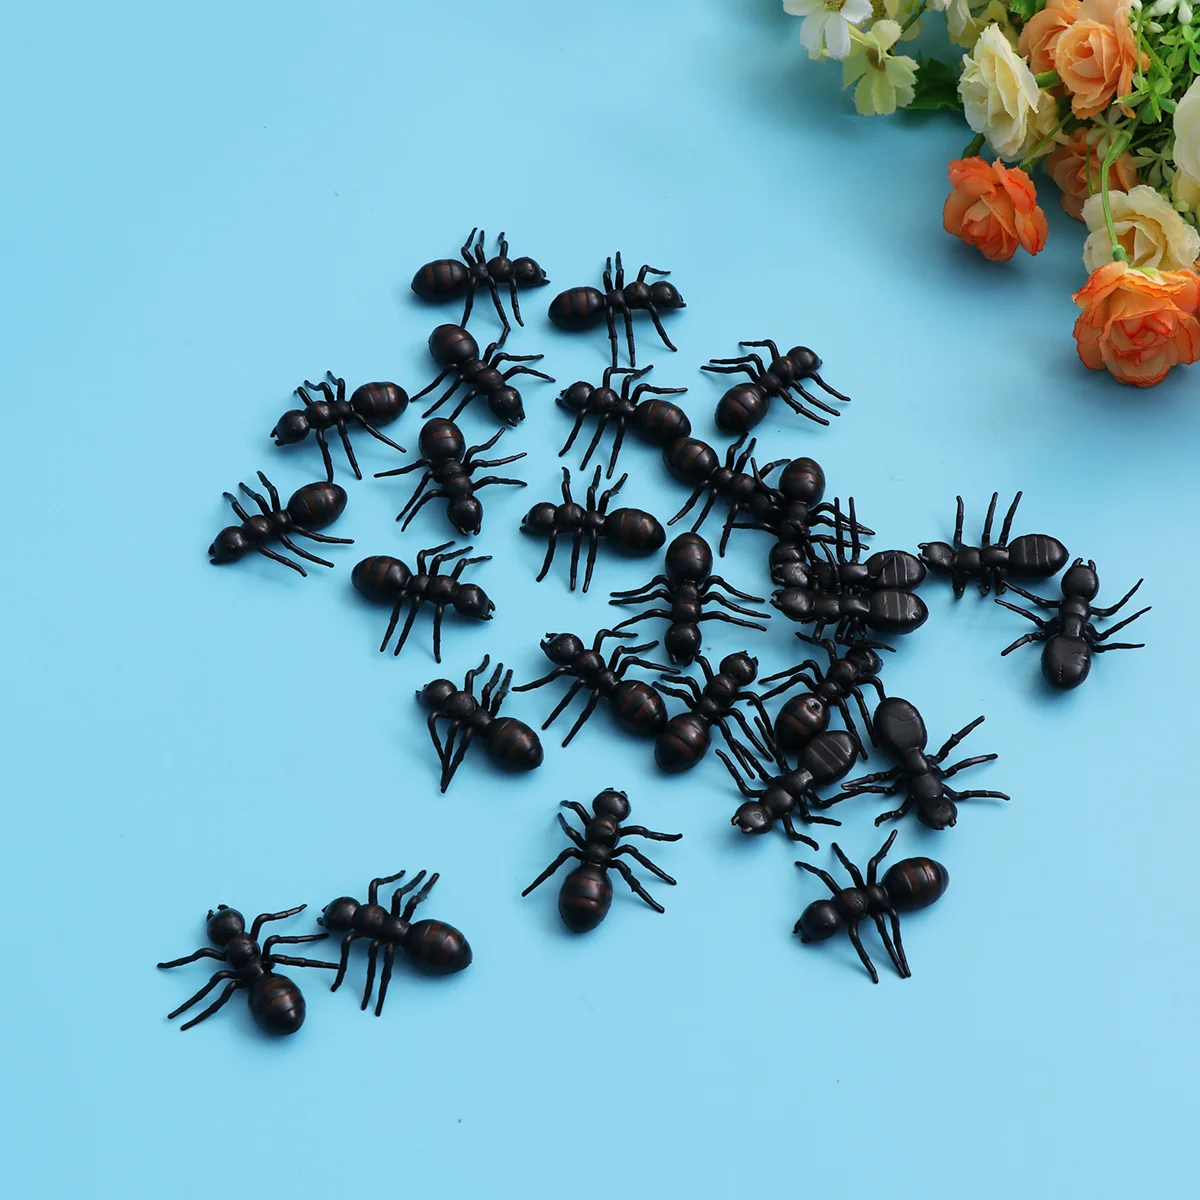 

Ants Toys Halloweeninsect Fake Ant Bugsrealistic Prank Toy Picnic Props Party Insects Kids Model Black Decorations Bug